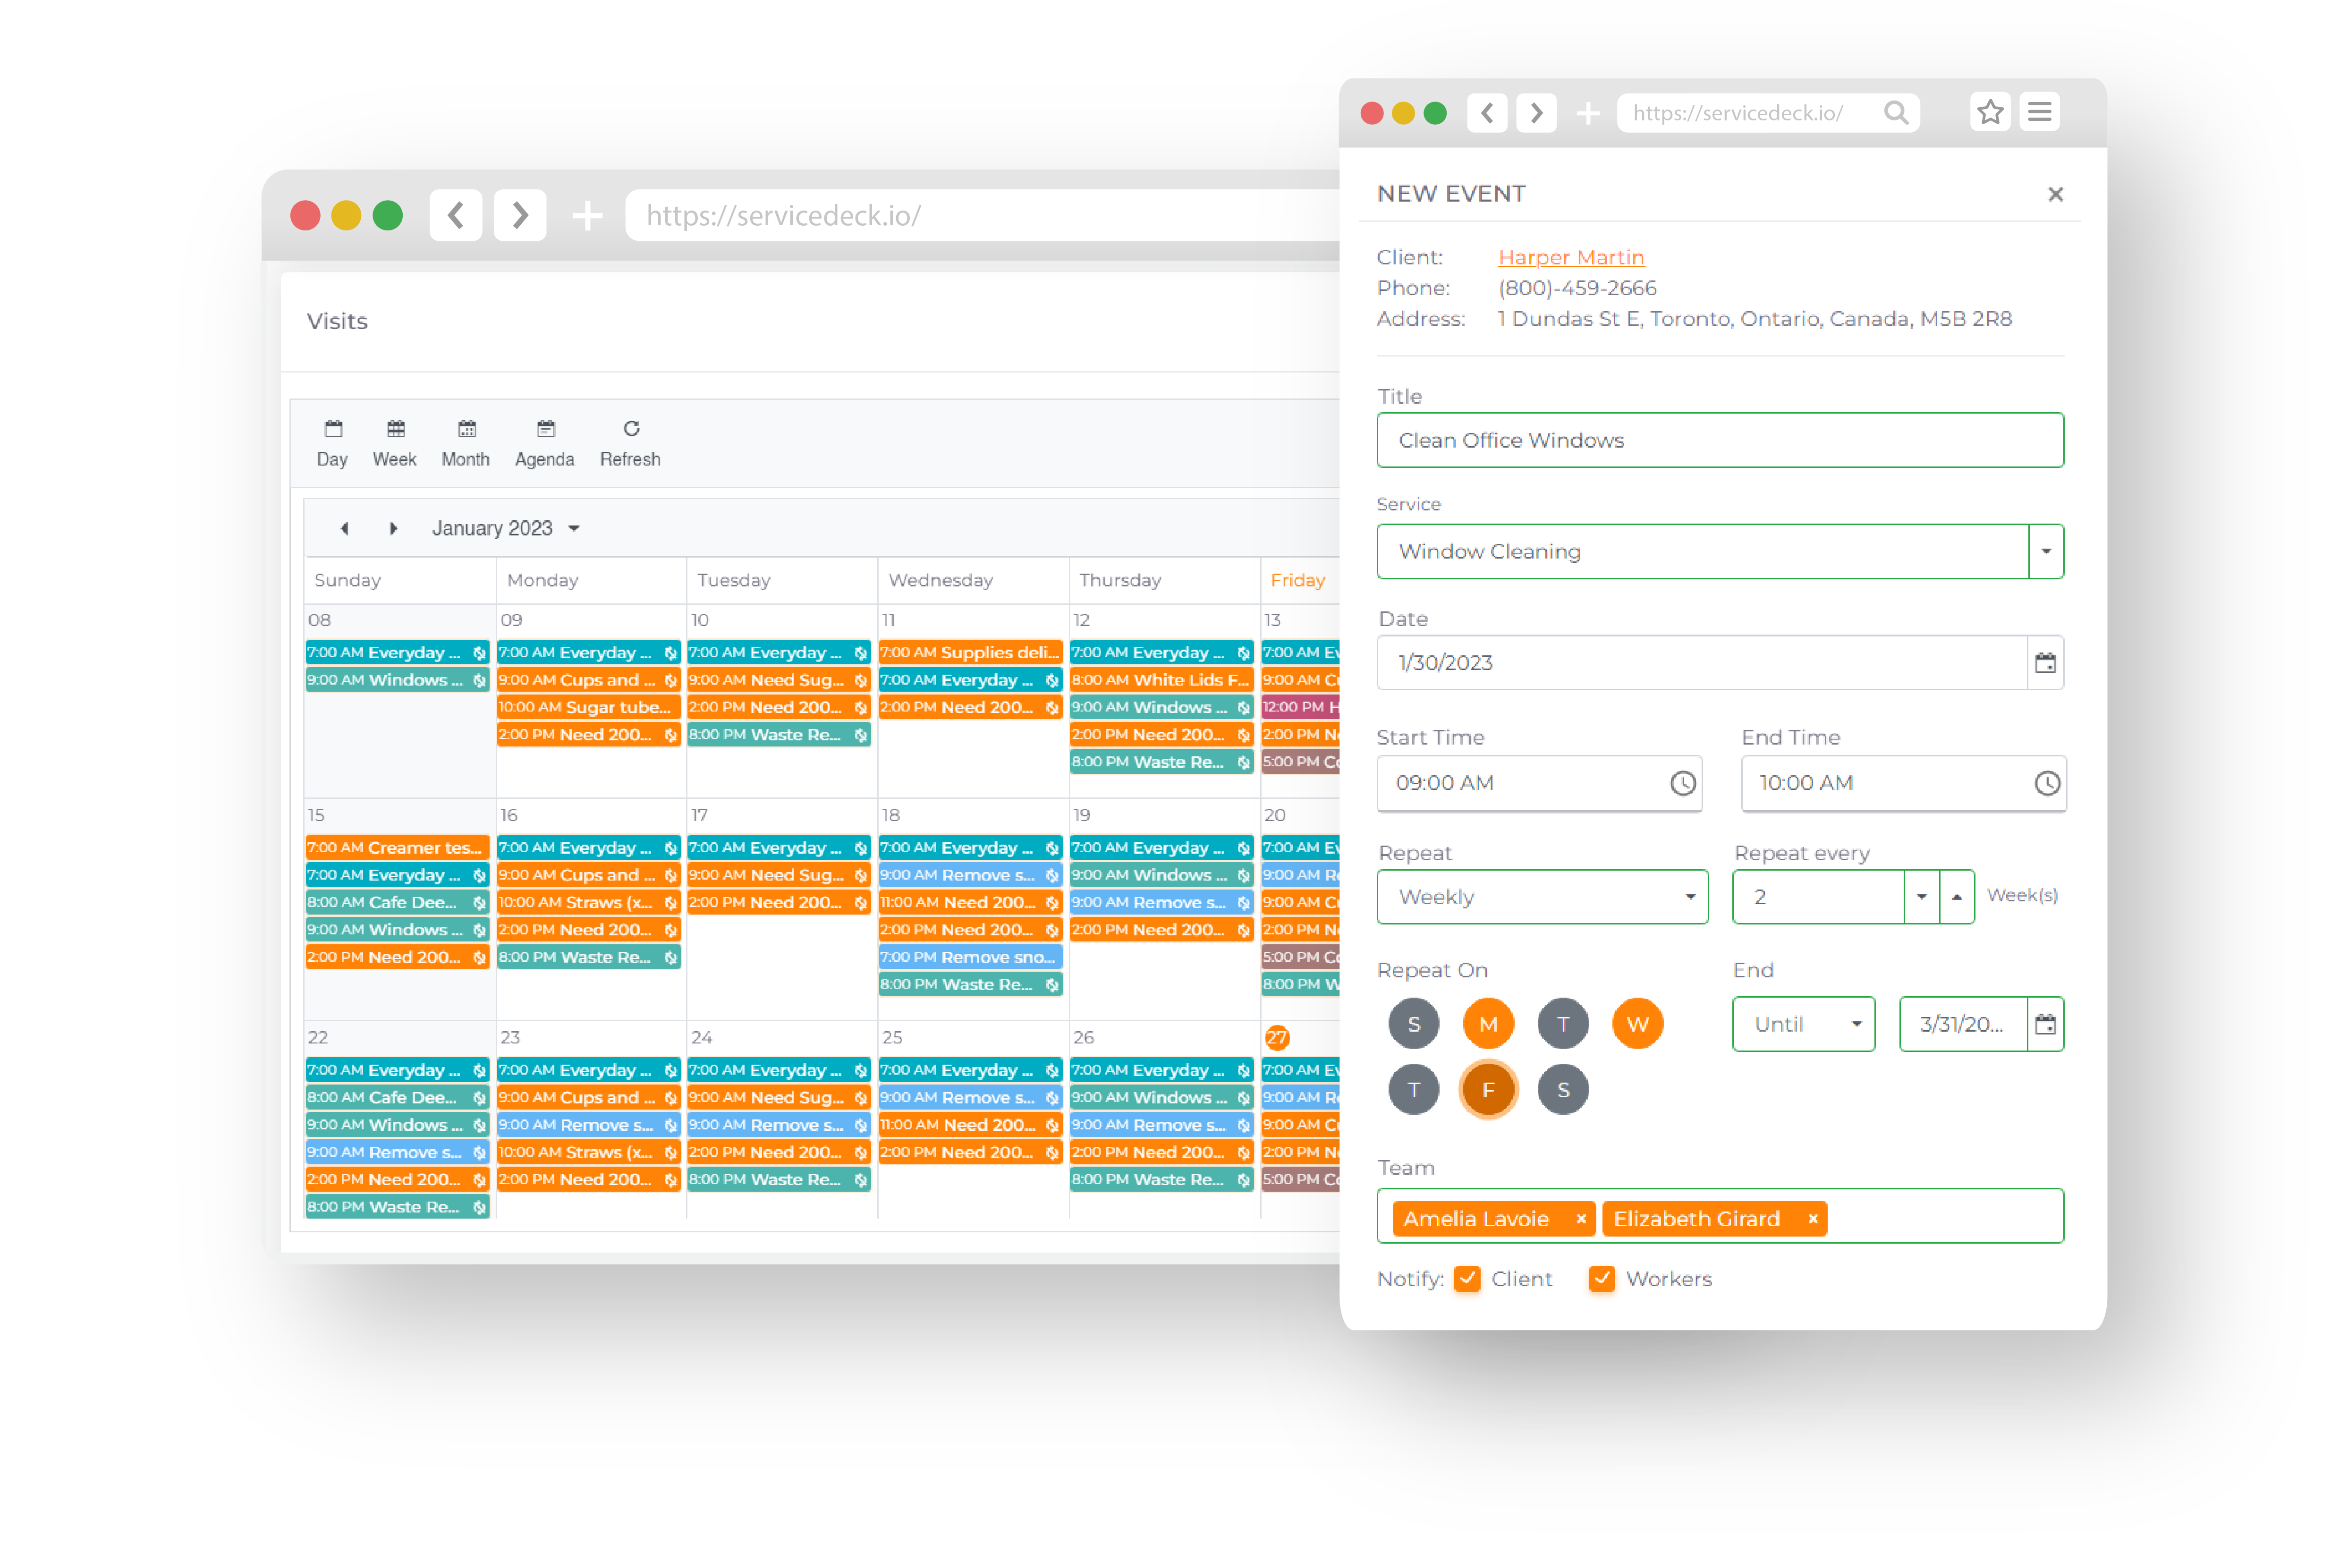 Smart Scheduling: Say goodbye to scheduling conflicts and maximize your team's efficiency with ServiceDeck's intelligent scheduling feature. Our platform enables you to easily assign jobs based on your workers' availability, skills, and location.